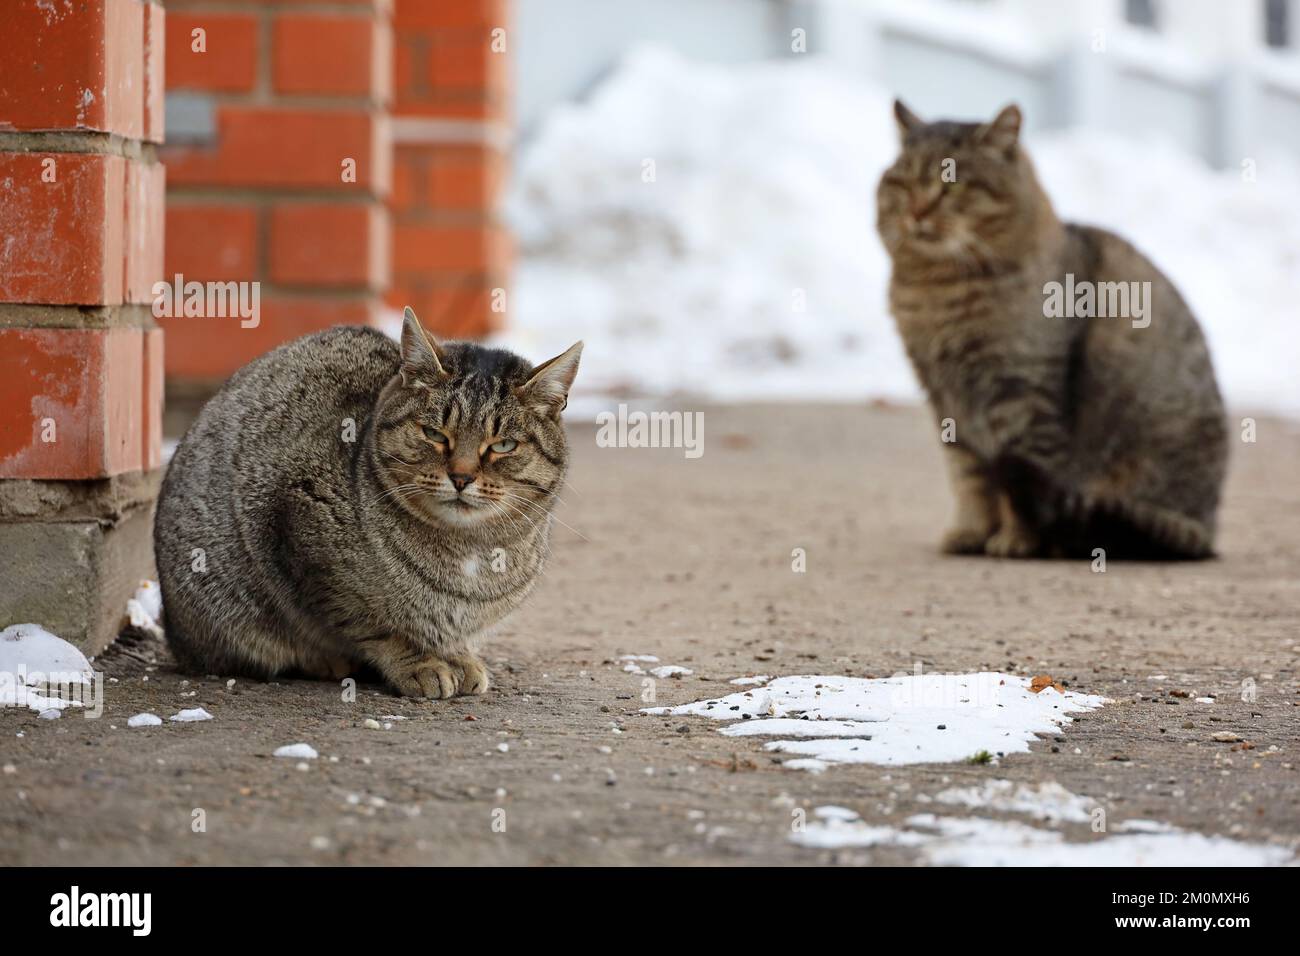 Two tabby cats sitting on a snowy street in winter Stock Photo